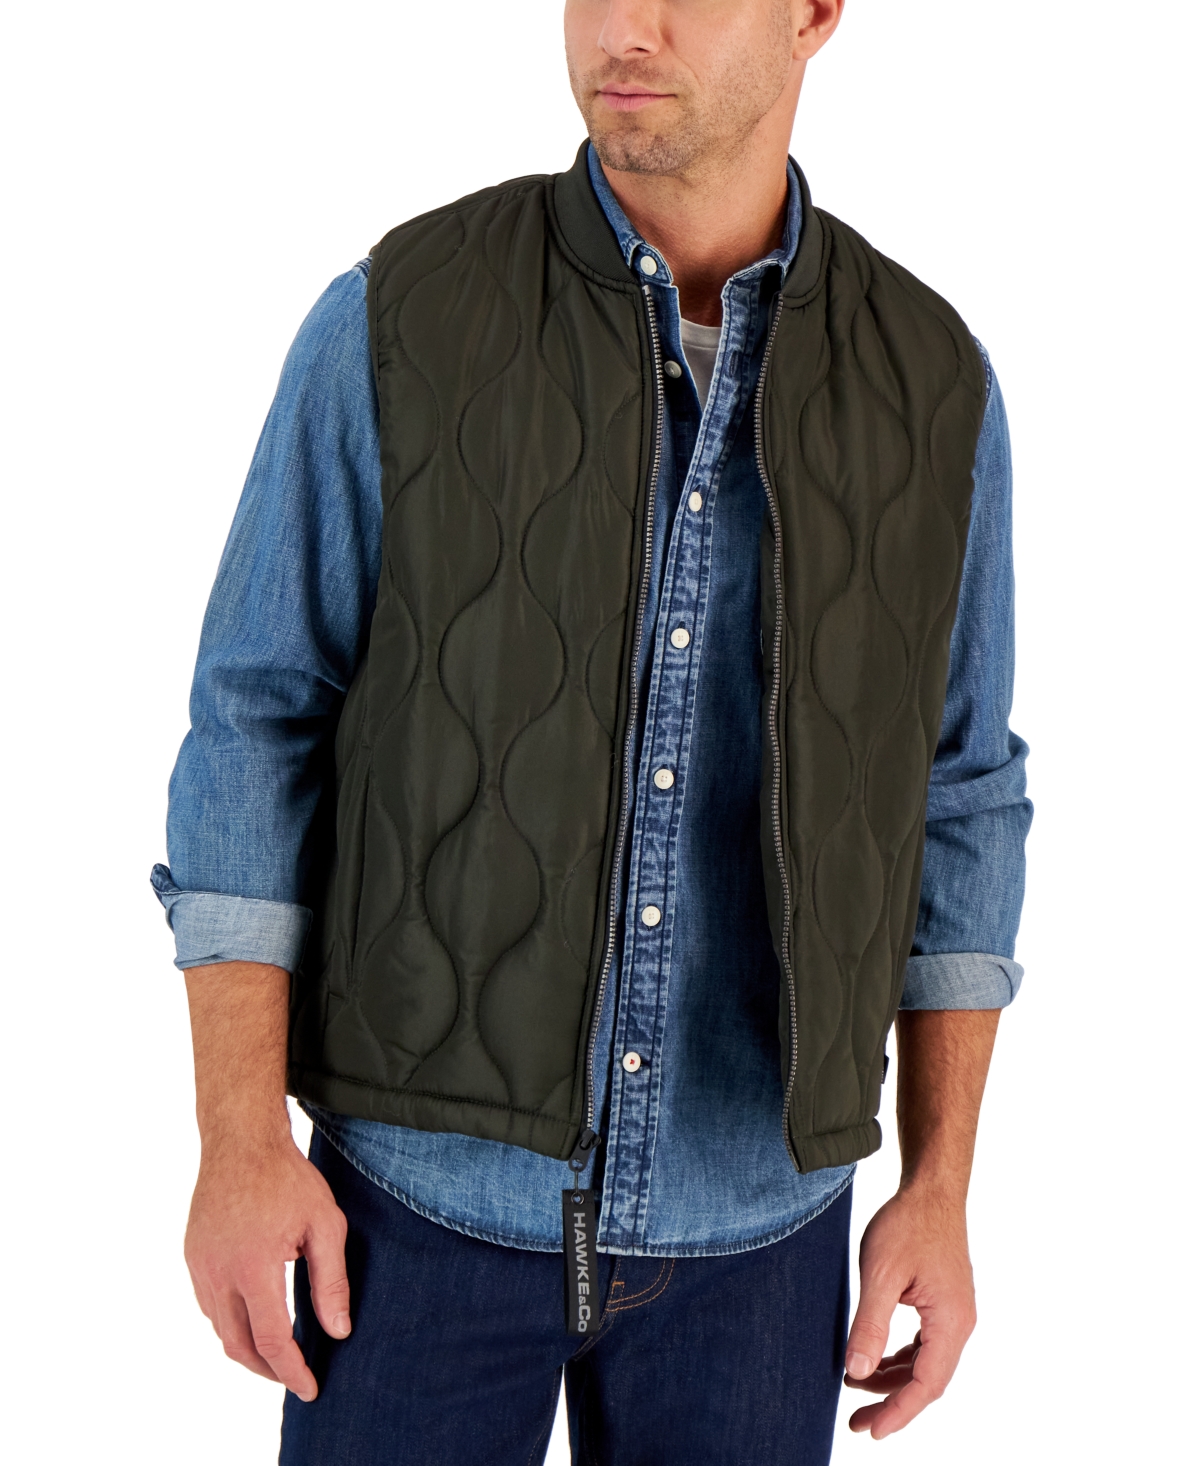 Men's Onion Quilted Vest - Loden